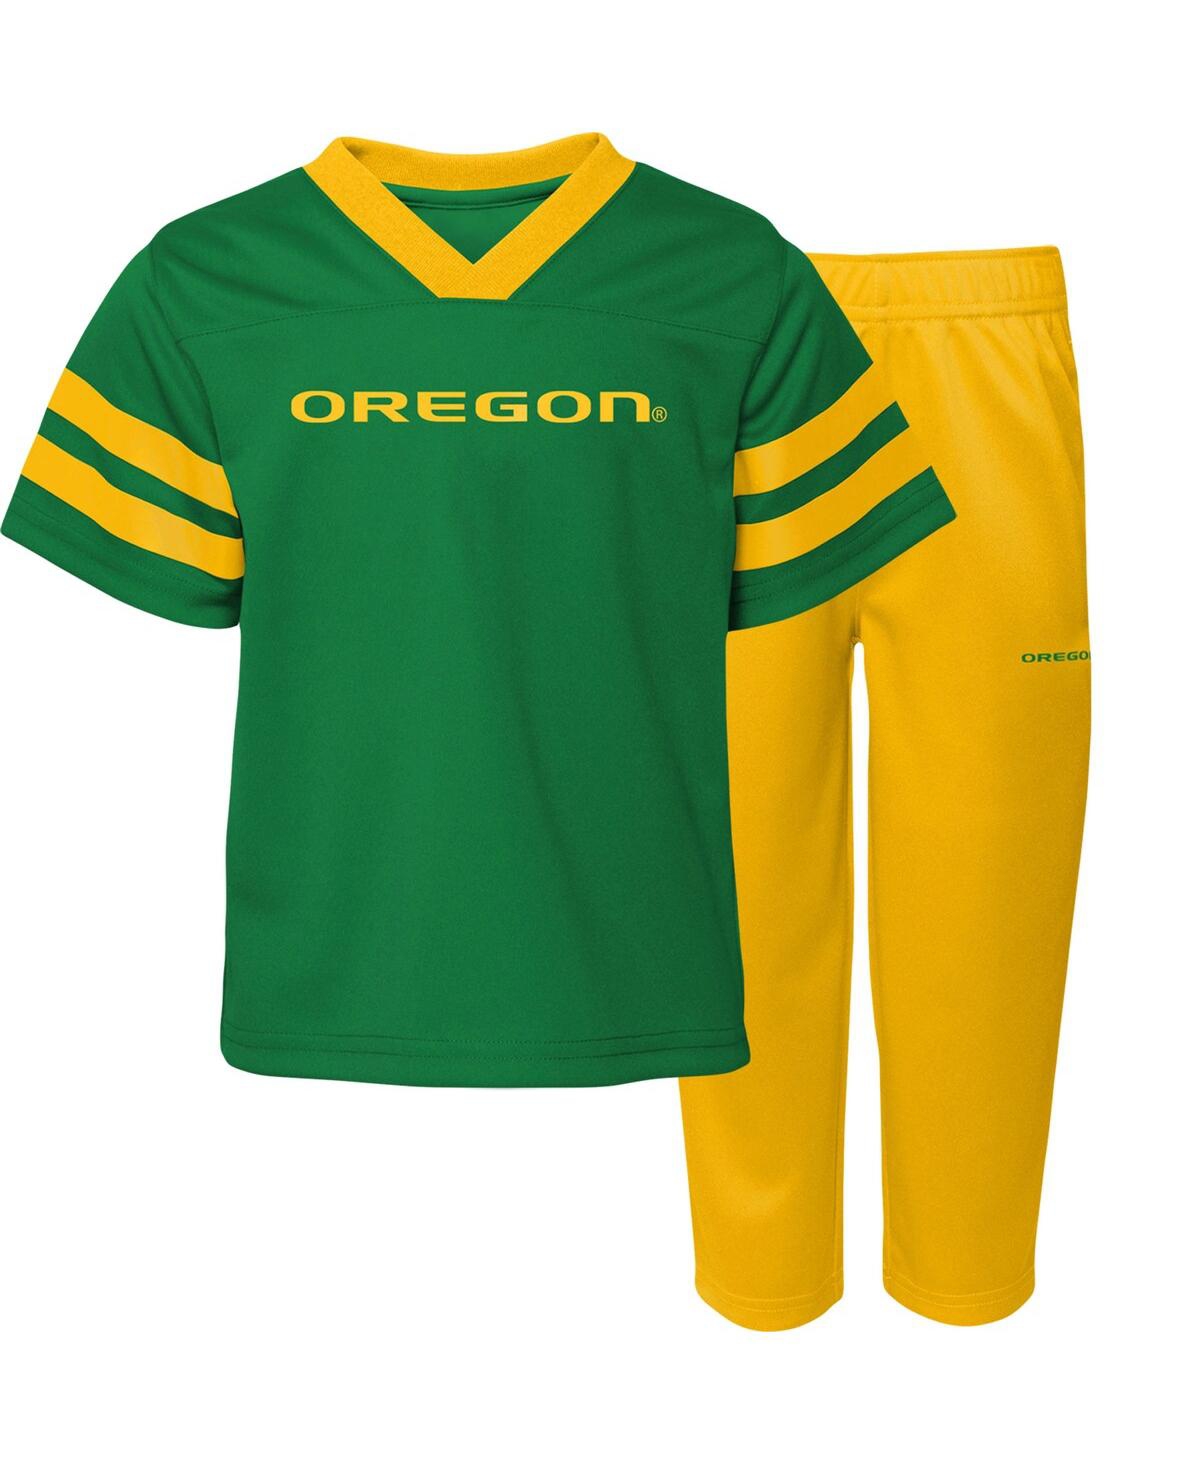 Outerstuff Babies' Little Boys Green, Yellow Oregon Ducks Red Zone Jersey And Pants Set In Green,yellow